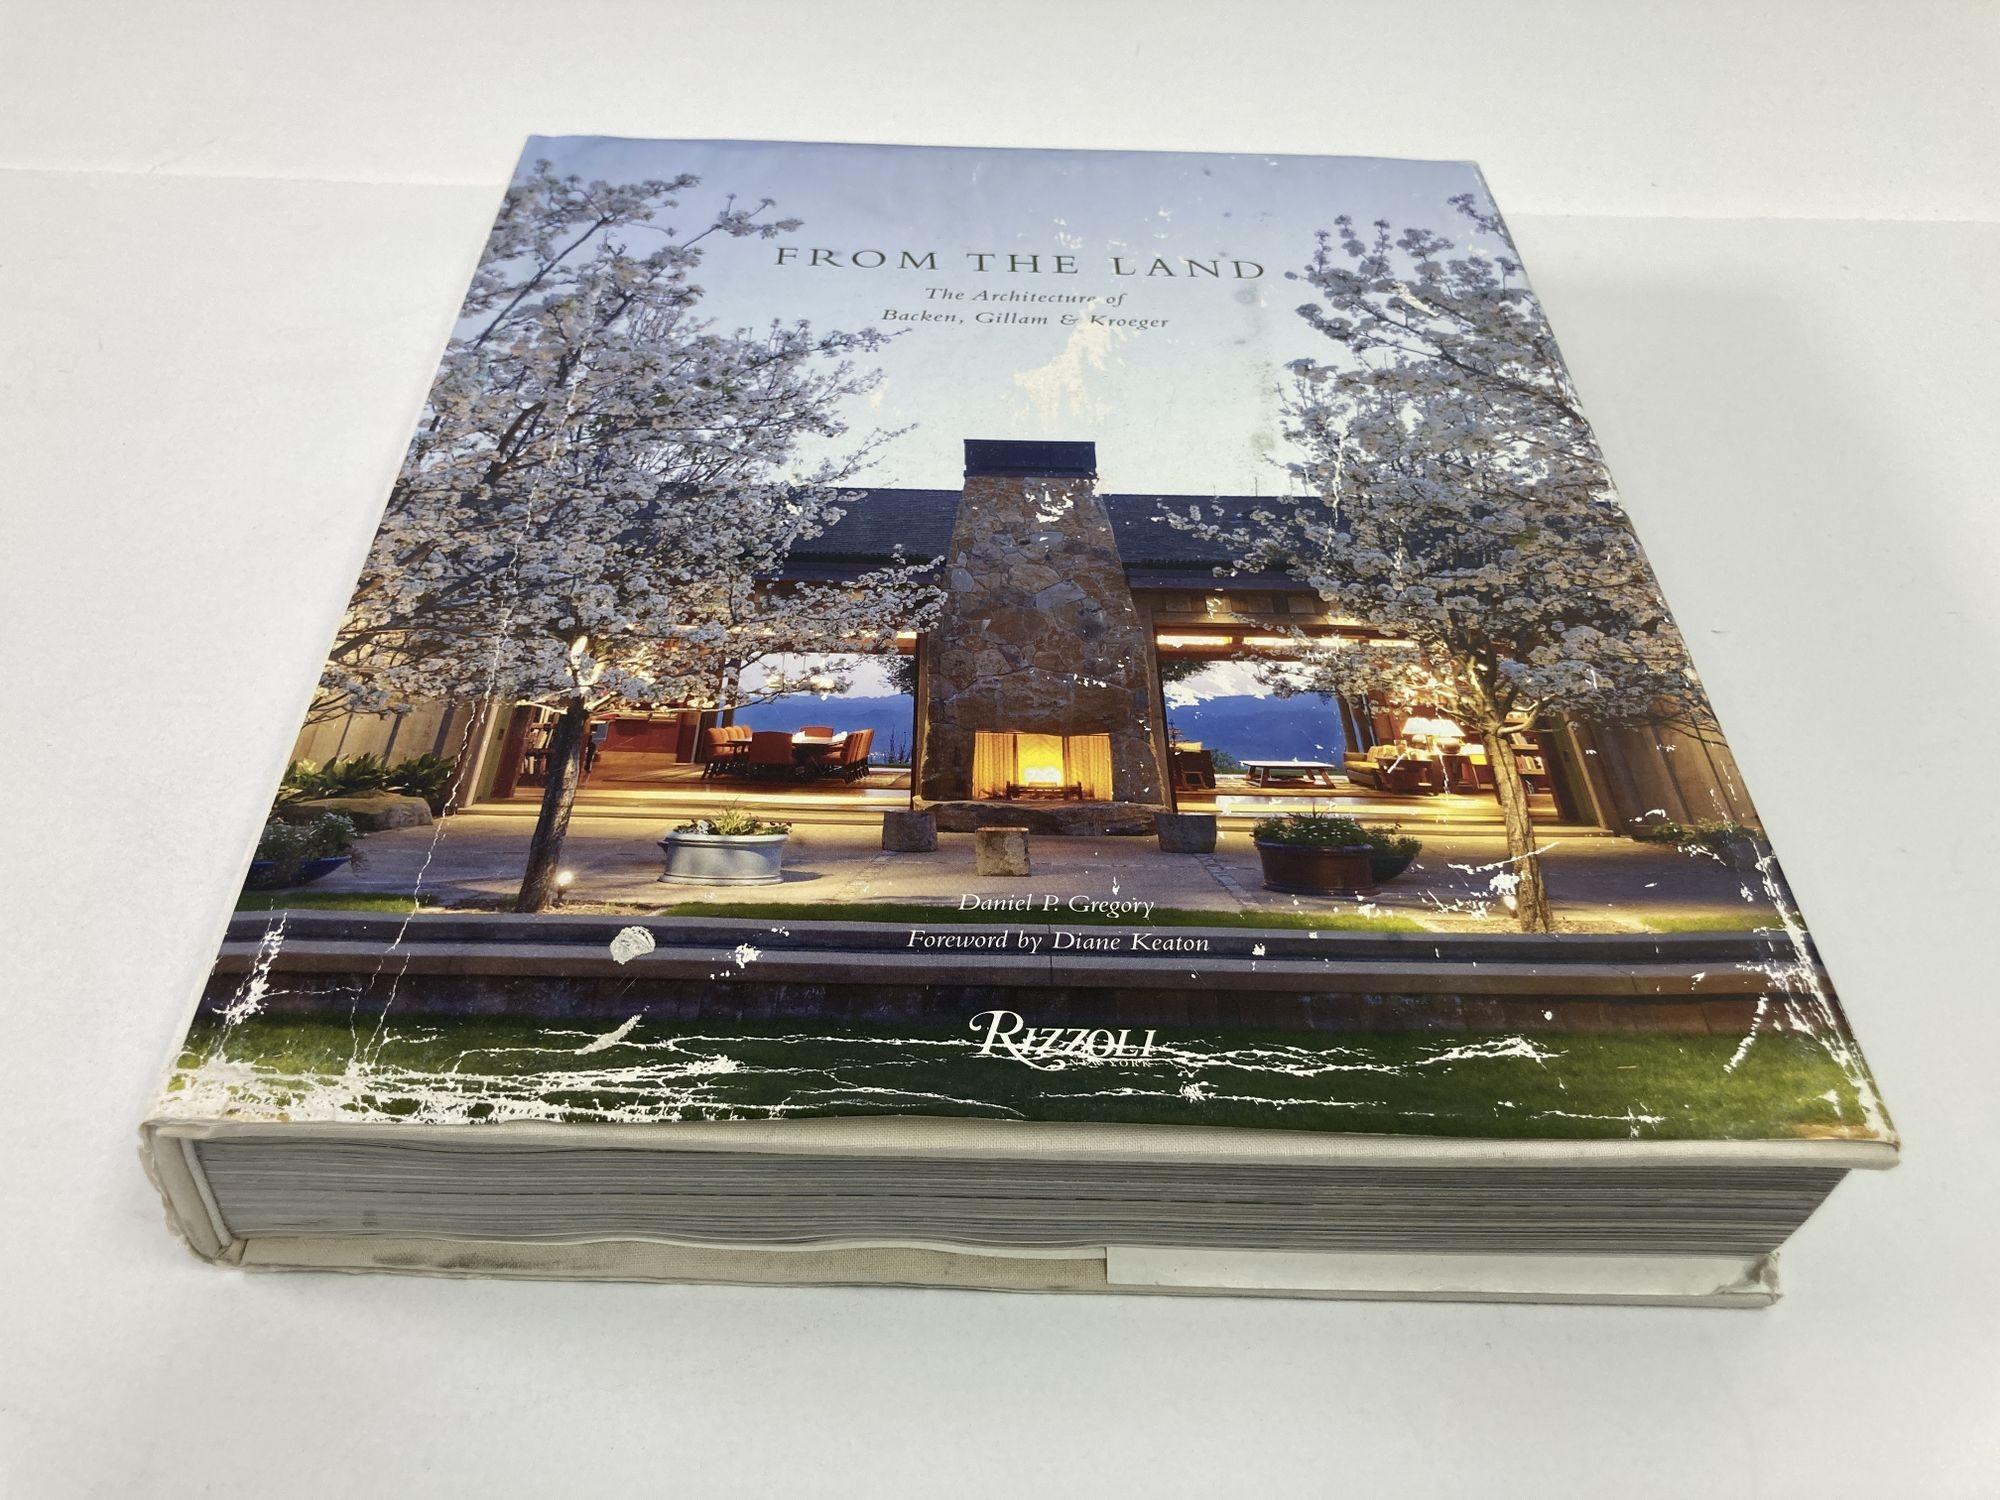 From the Land: Backen, Gillam, & Kroeger Architects Hardcover Book.
October 8, 2013 by Erhard Pfeiffer (Photographer), Stanley Abercrombie (Afterword), Diane Keaton.
Elegant rusticity meets unpretentious luxury in the work of this award-winning